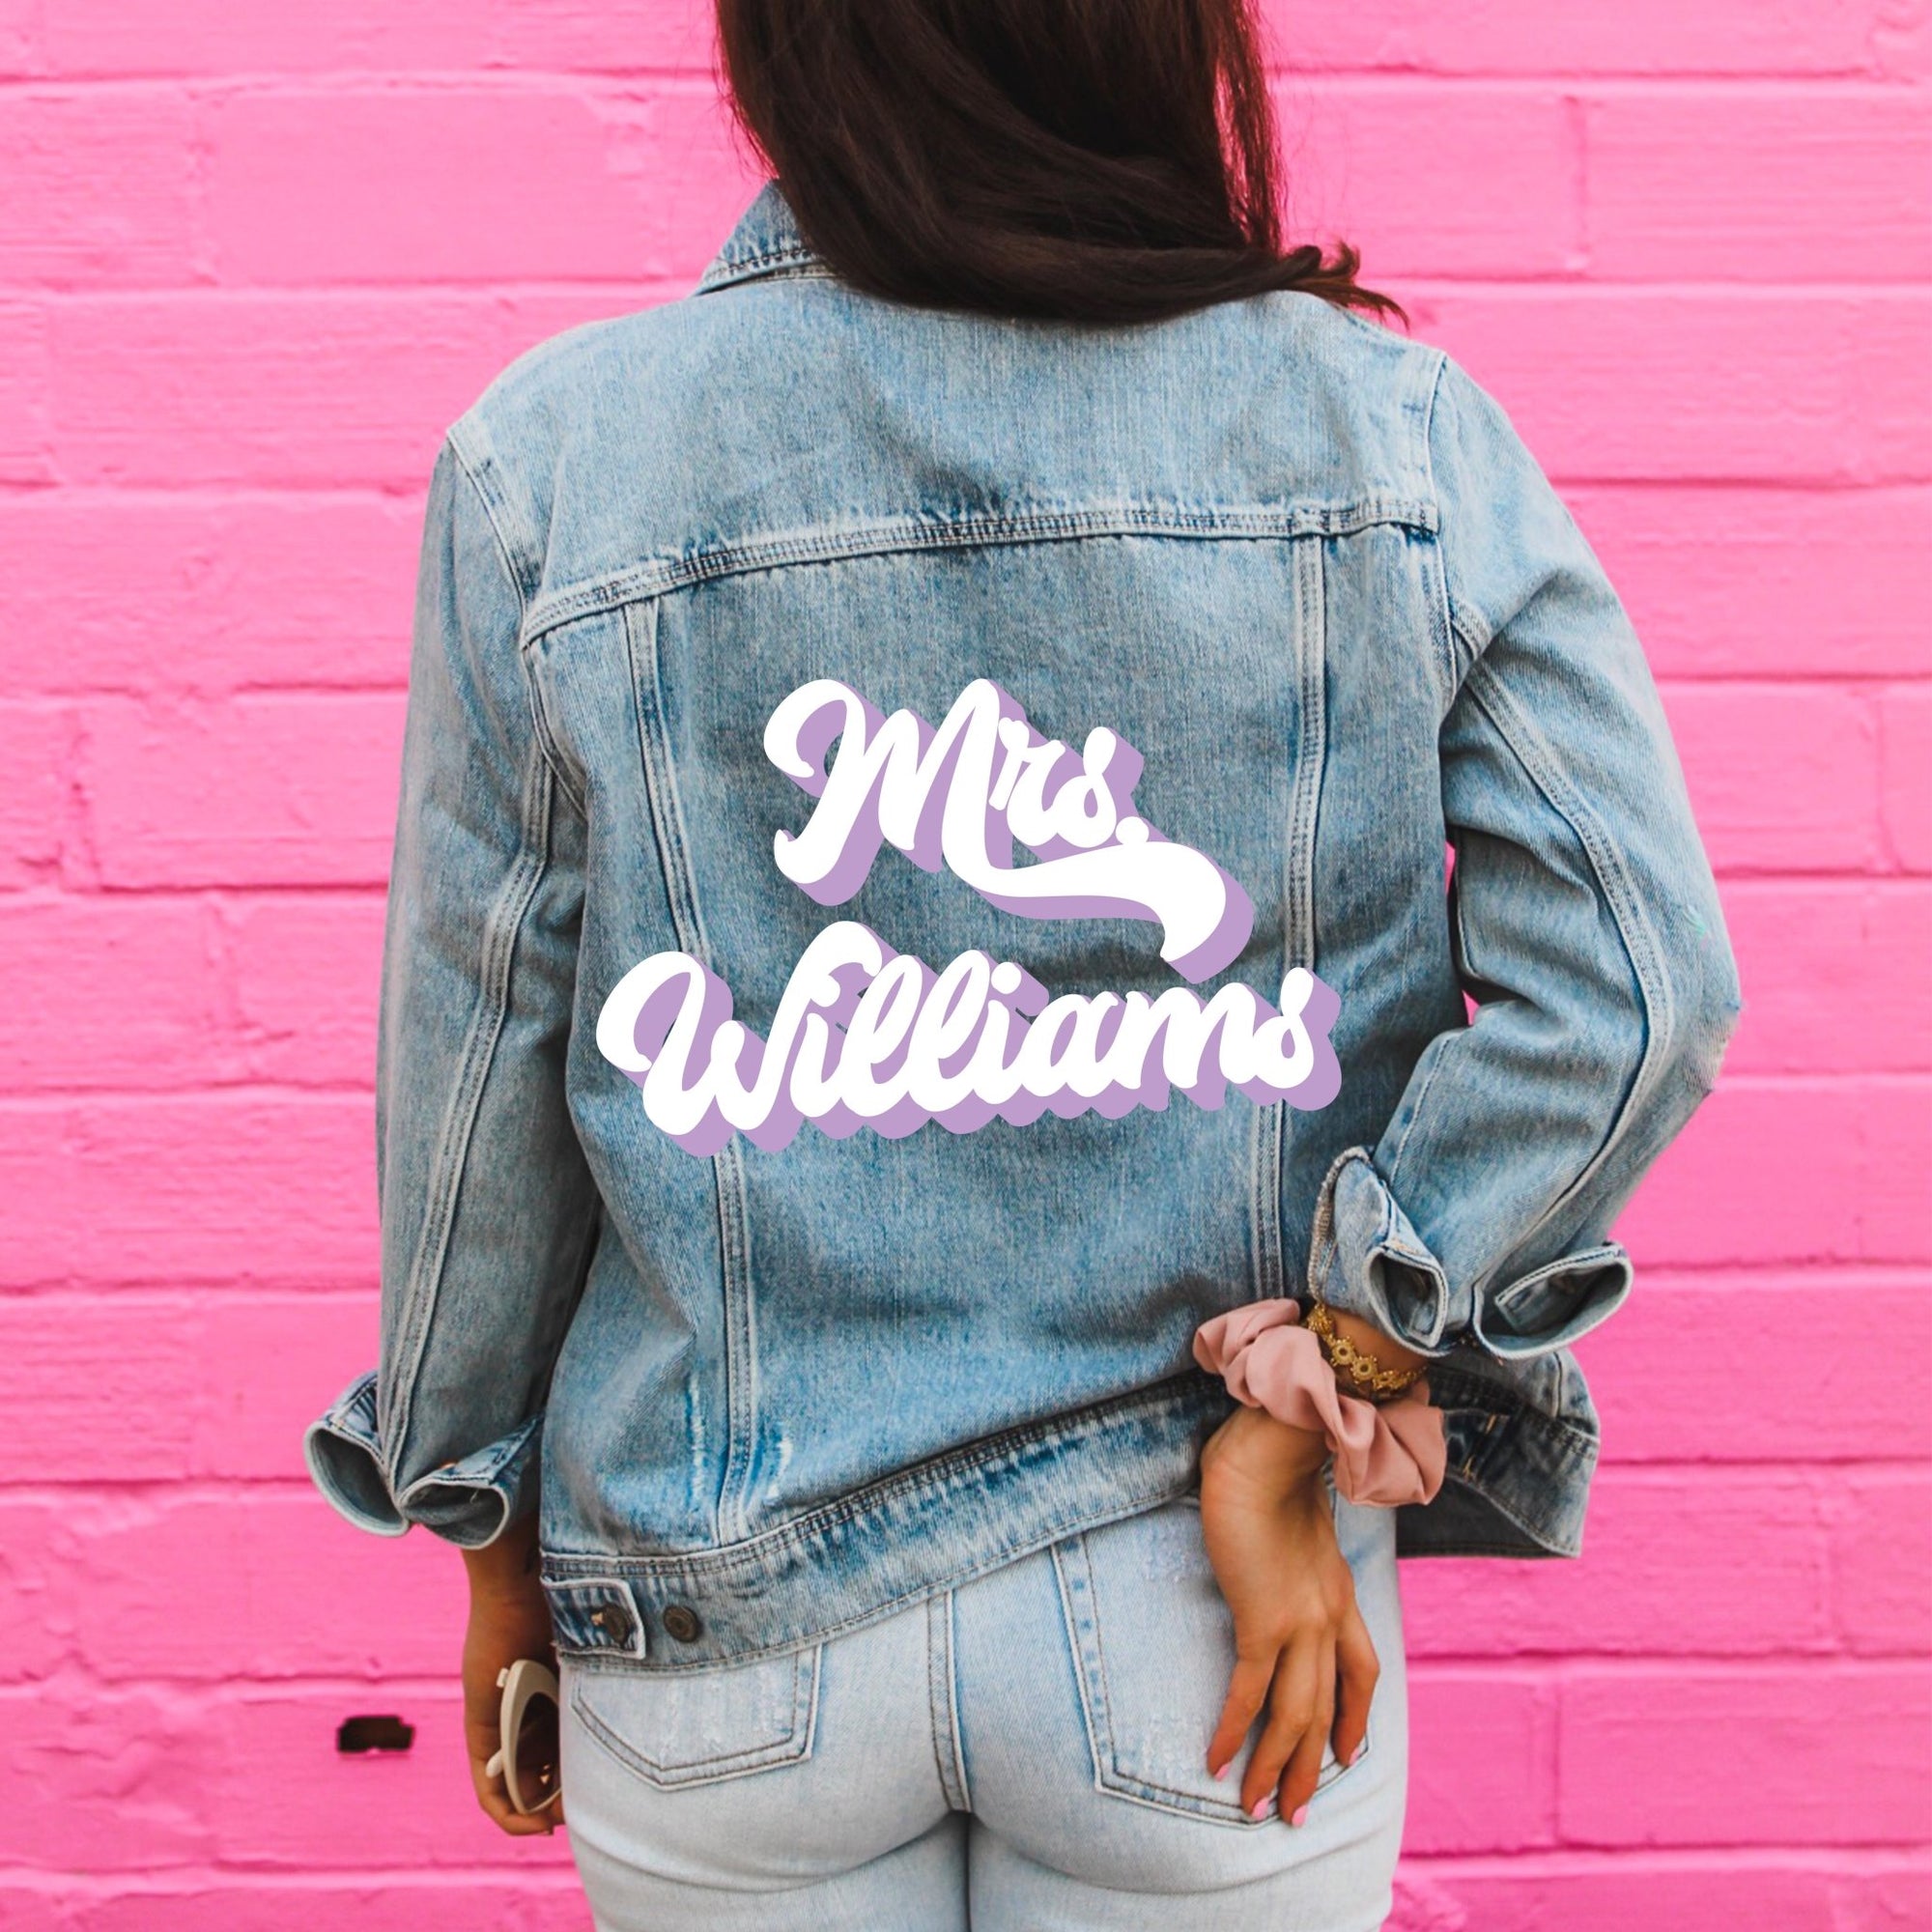 A woman stands in front in a pink wall showing off her customized denim jacket with her last name printed on it in pink and white.